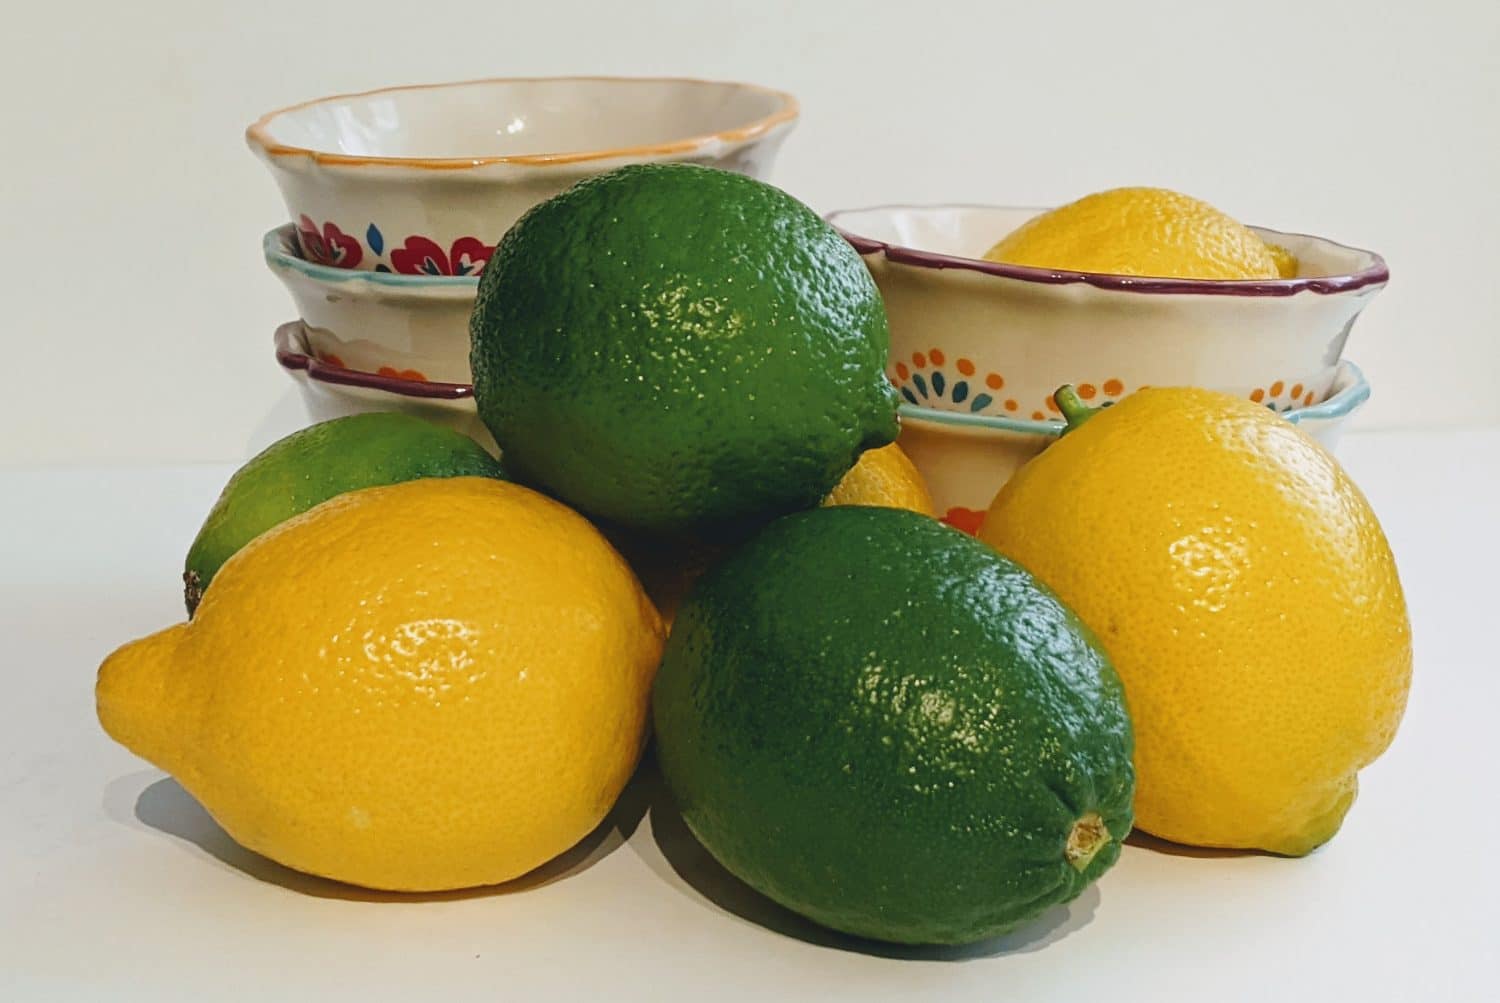 lemons and limes in a dish